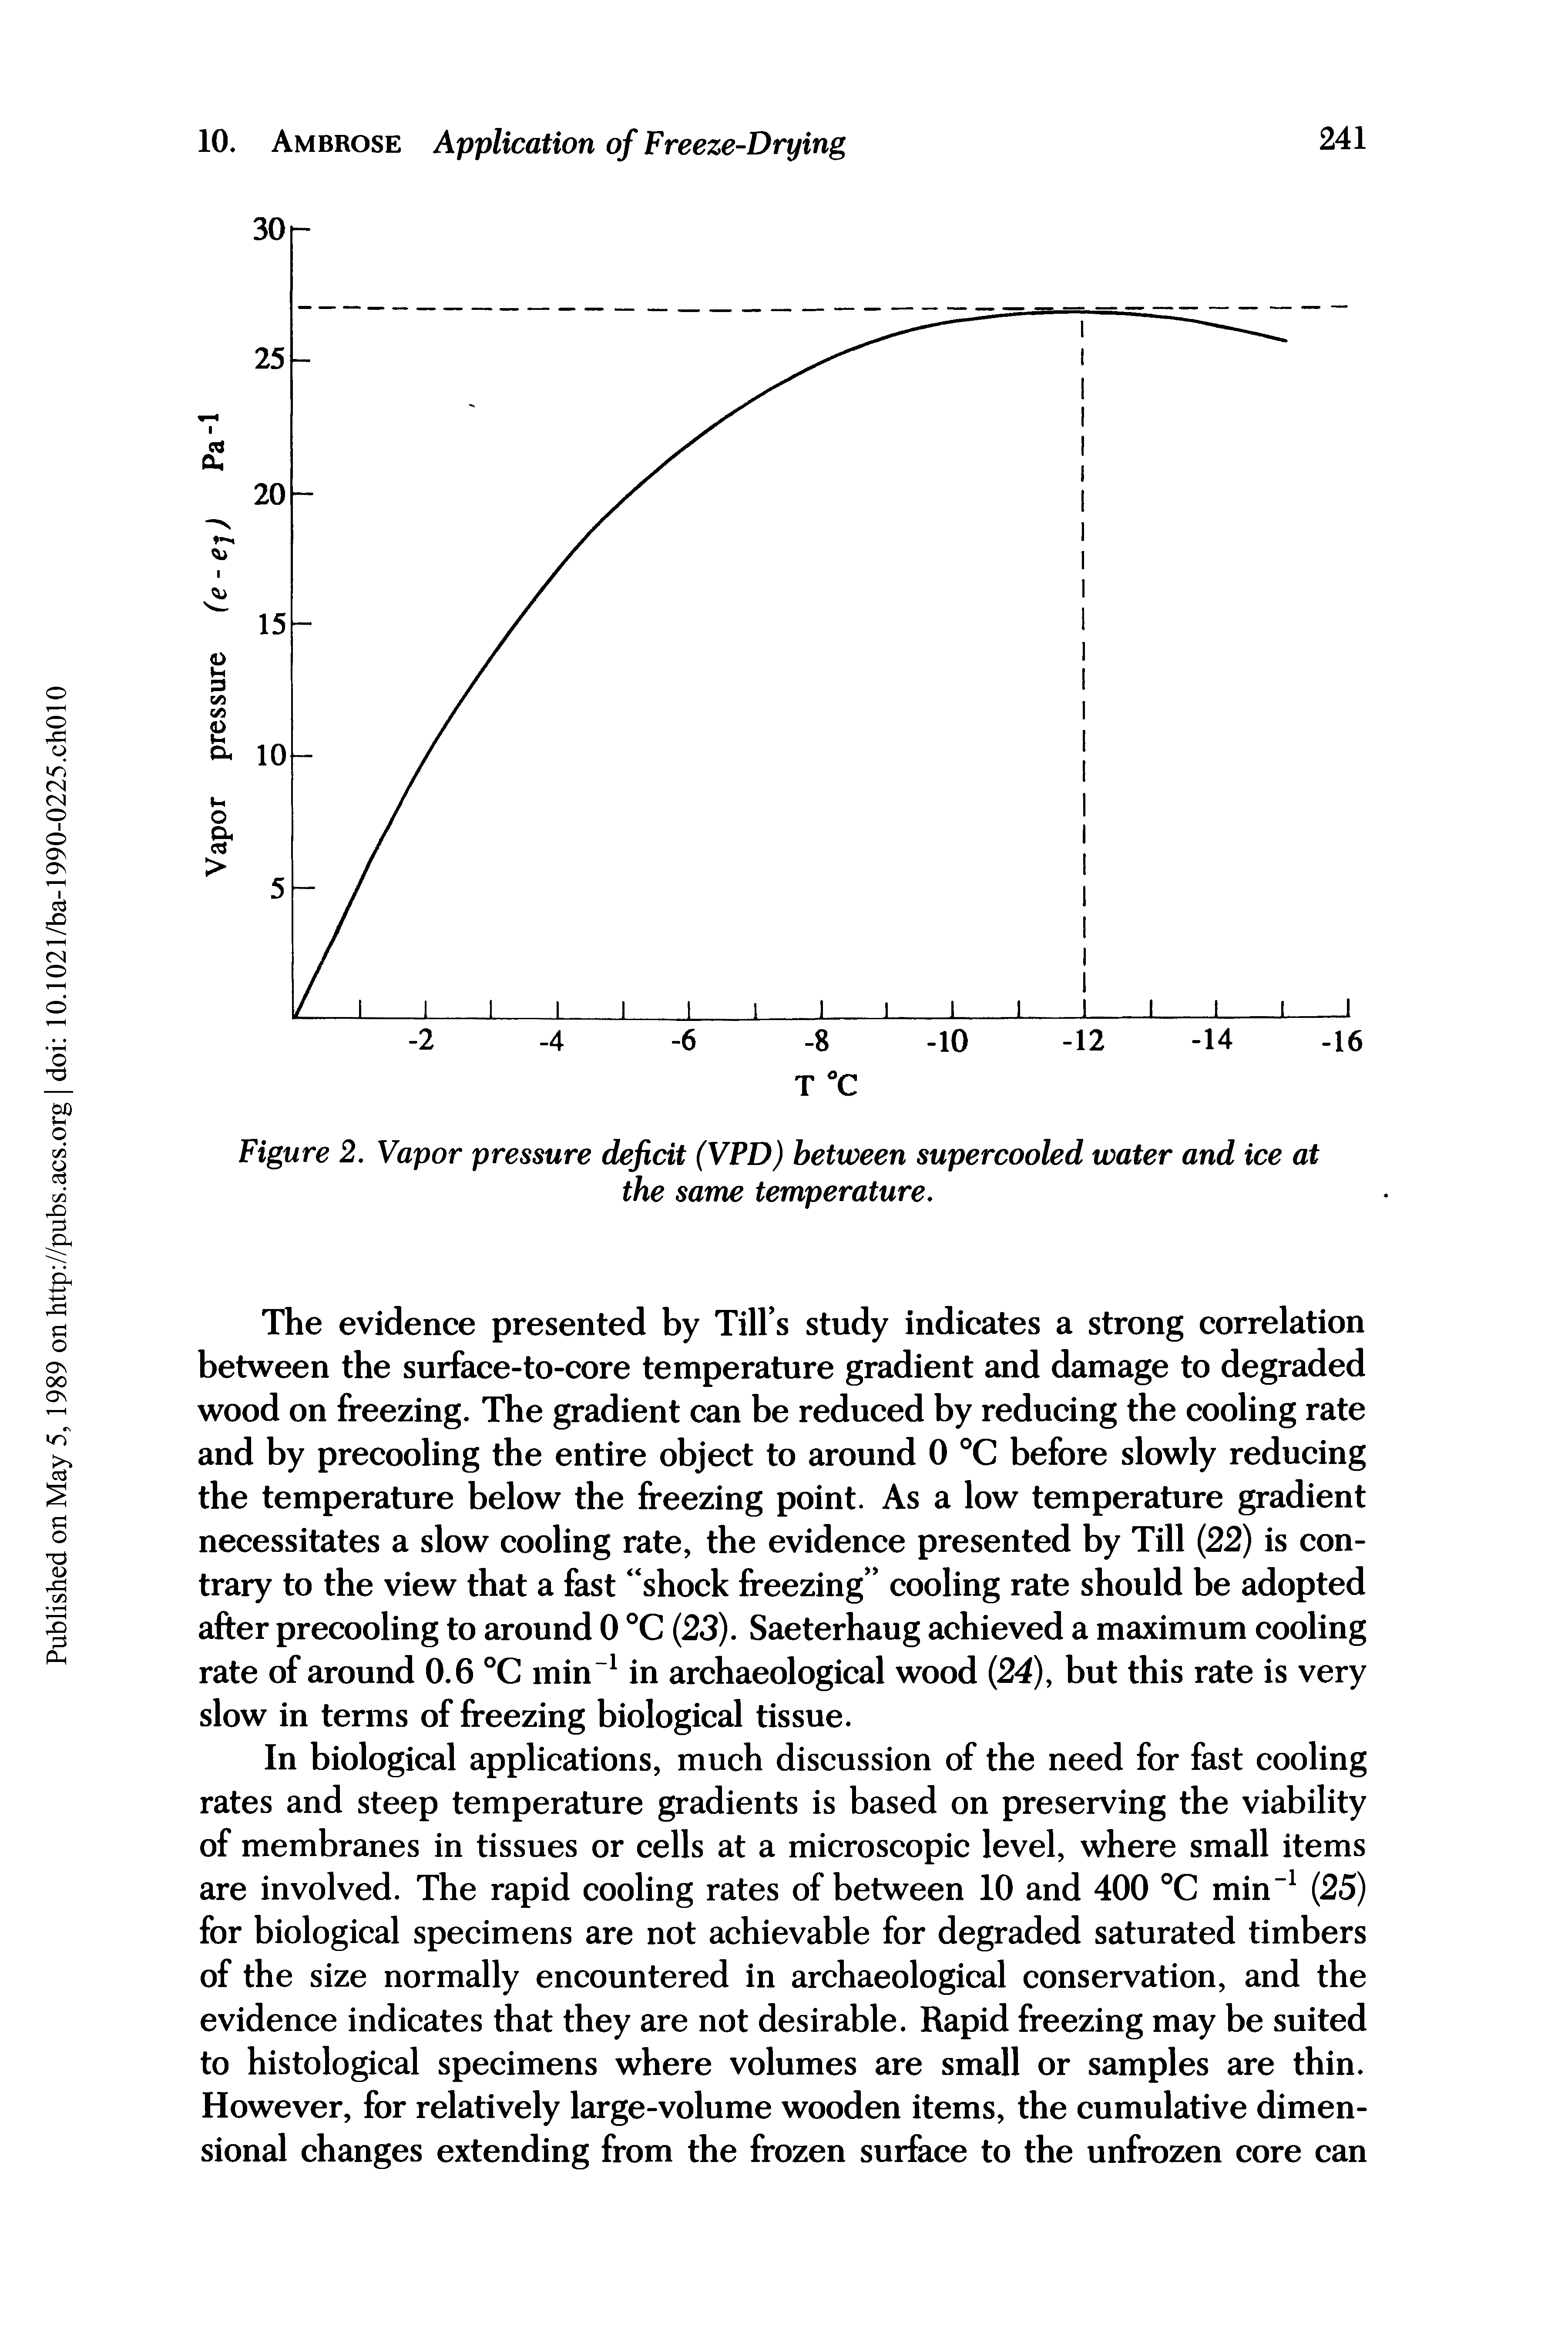 Figure 2. Vapor pressure deficit (VPD) between supercooled water and ice at the same temperature.